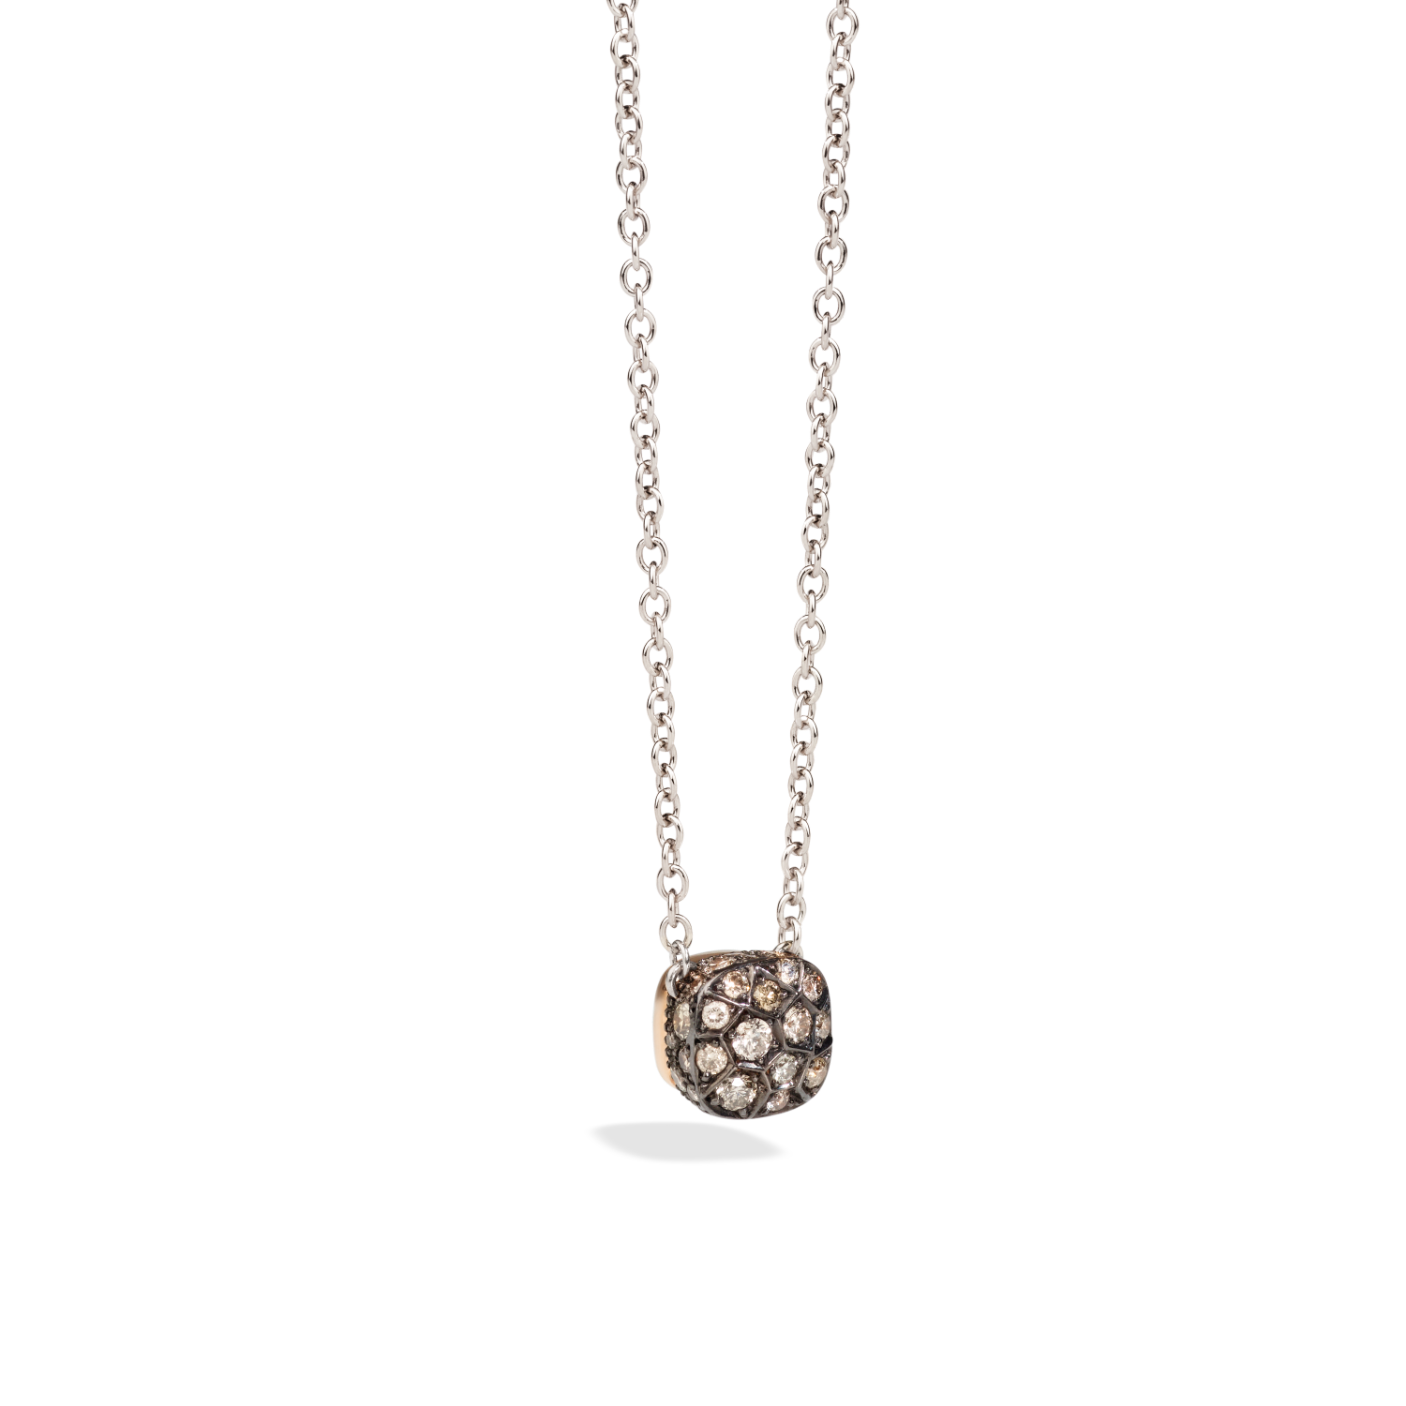 PCB6012_O6000_DBR00_010_Pomellato_pendant-with-chain-nudo-rose-gold-18kt-white-gold-18kt-brown-diamond.png